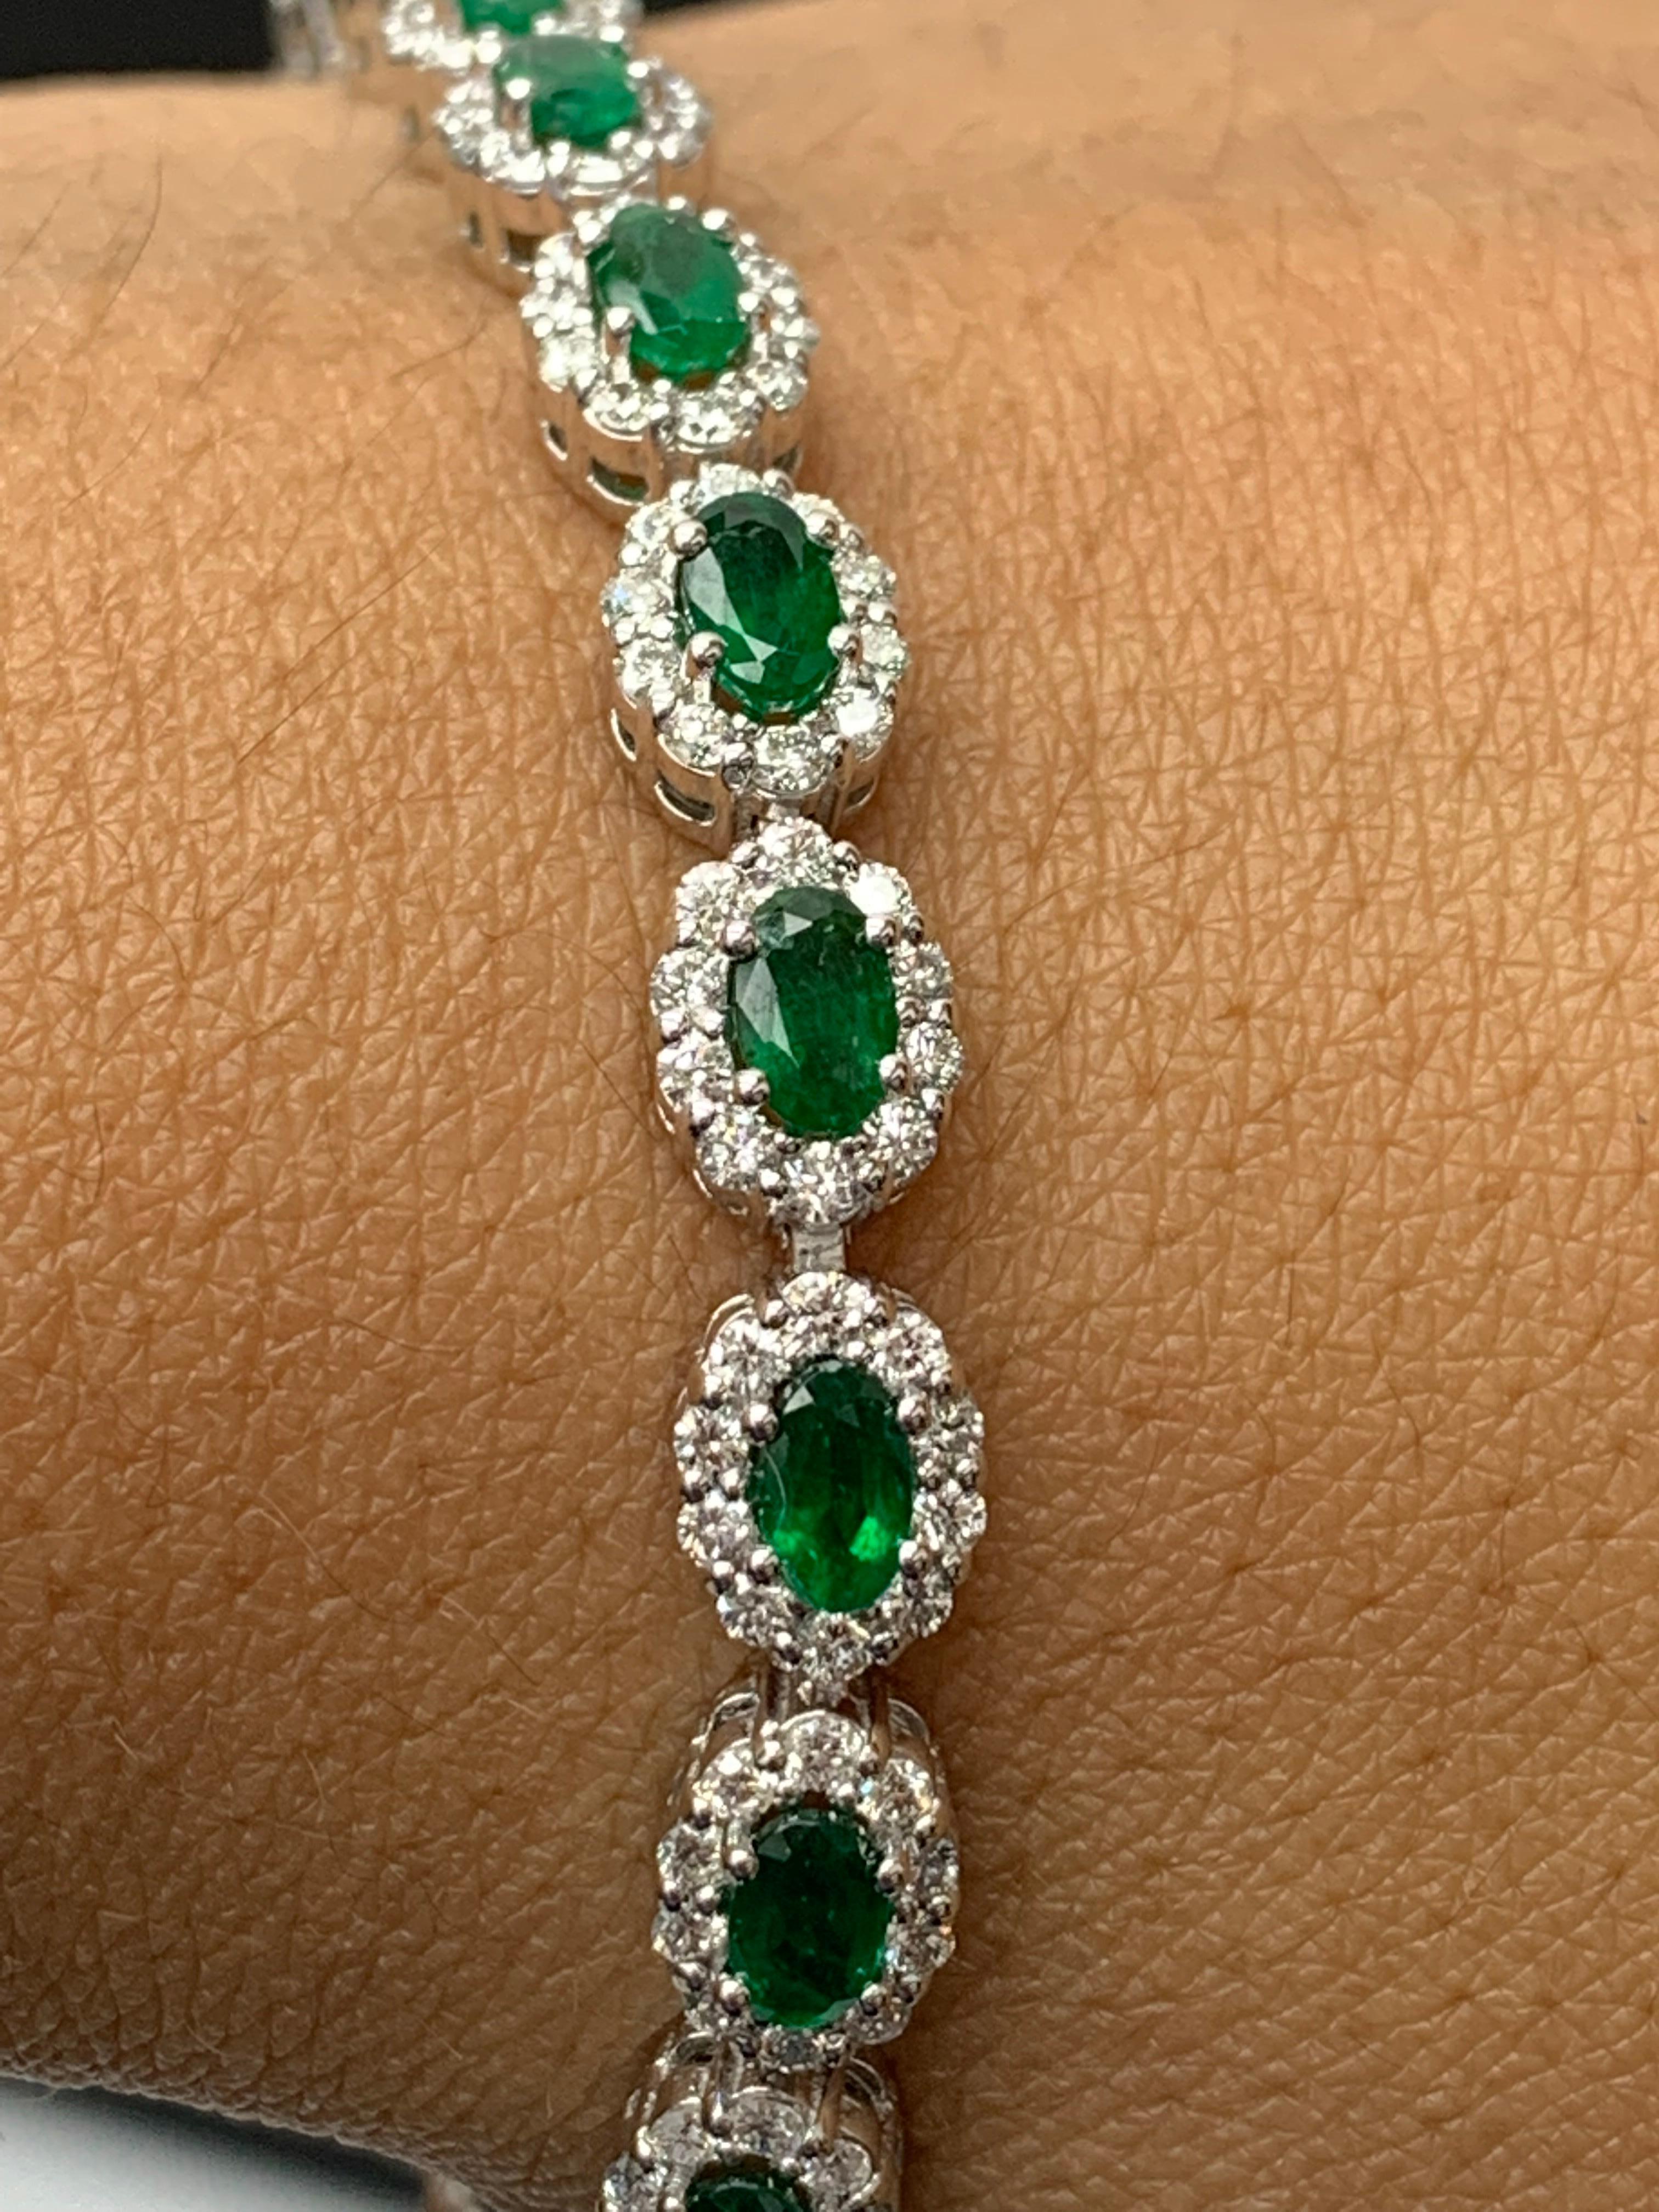 Women's 4.69 Carat Oval Cut Emerald and Diamond Halo Bracelet in 14K White Gold For Sale